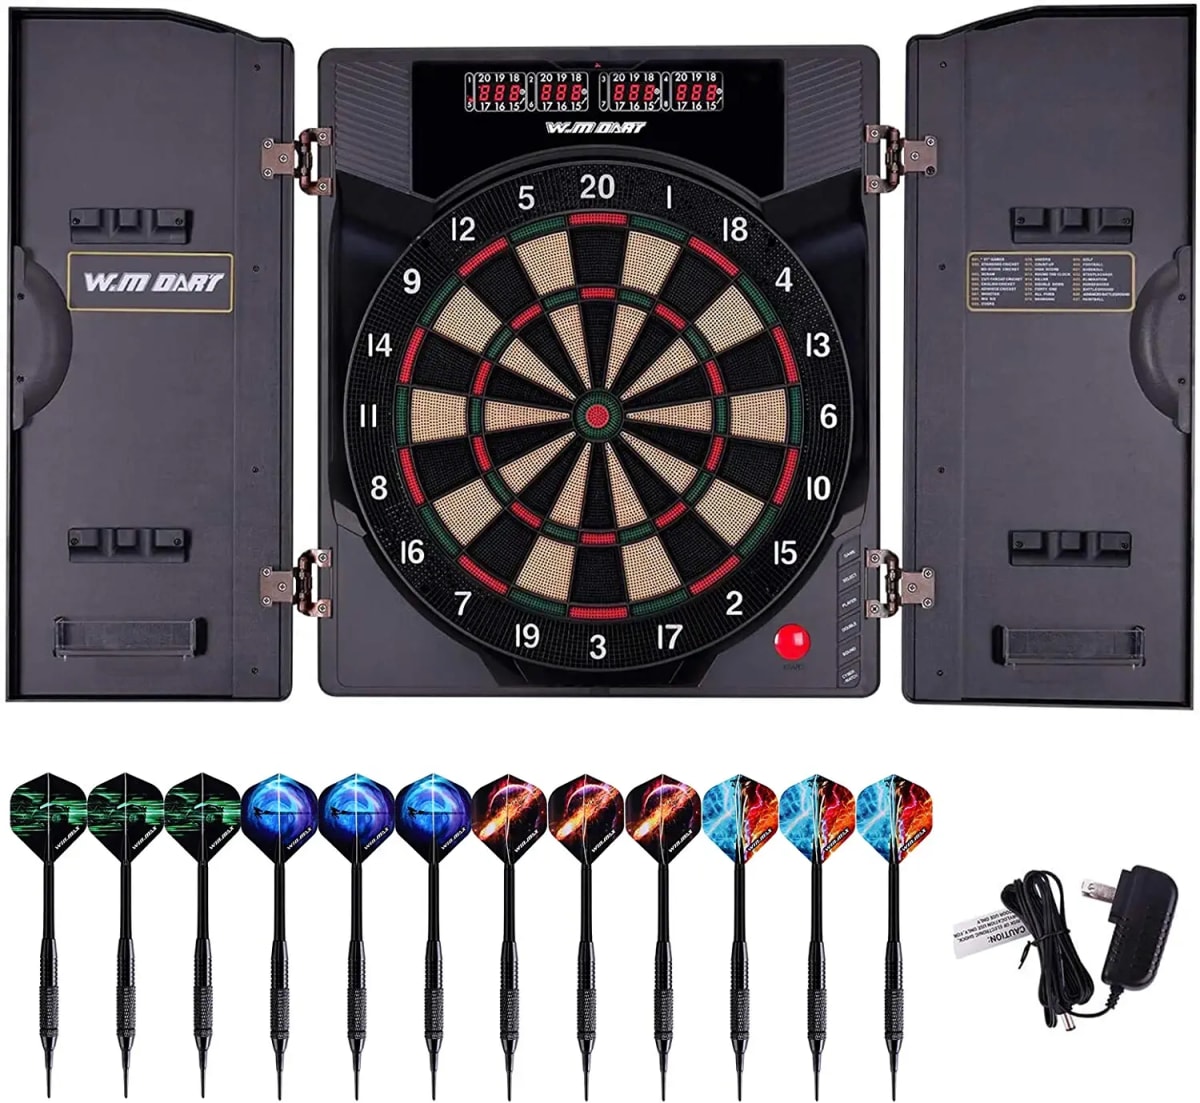 Electronic Dart Board LED Electric Digital Dart Boards for Adults with Cabinet with 12 Soft Tip Dartboard Set